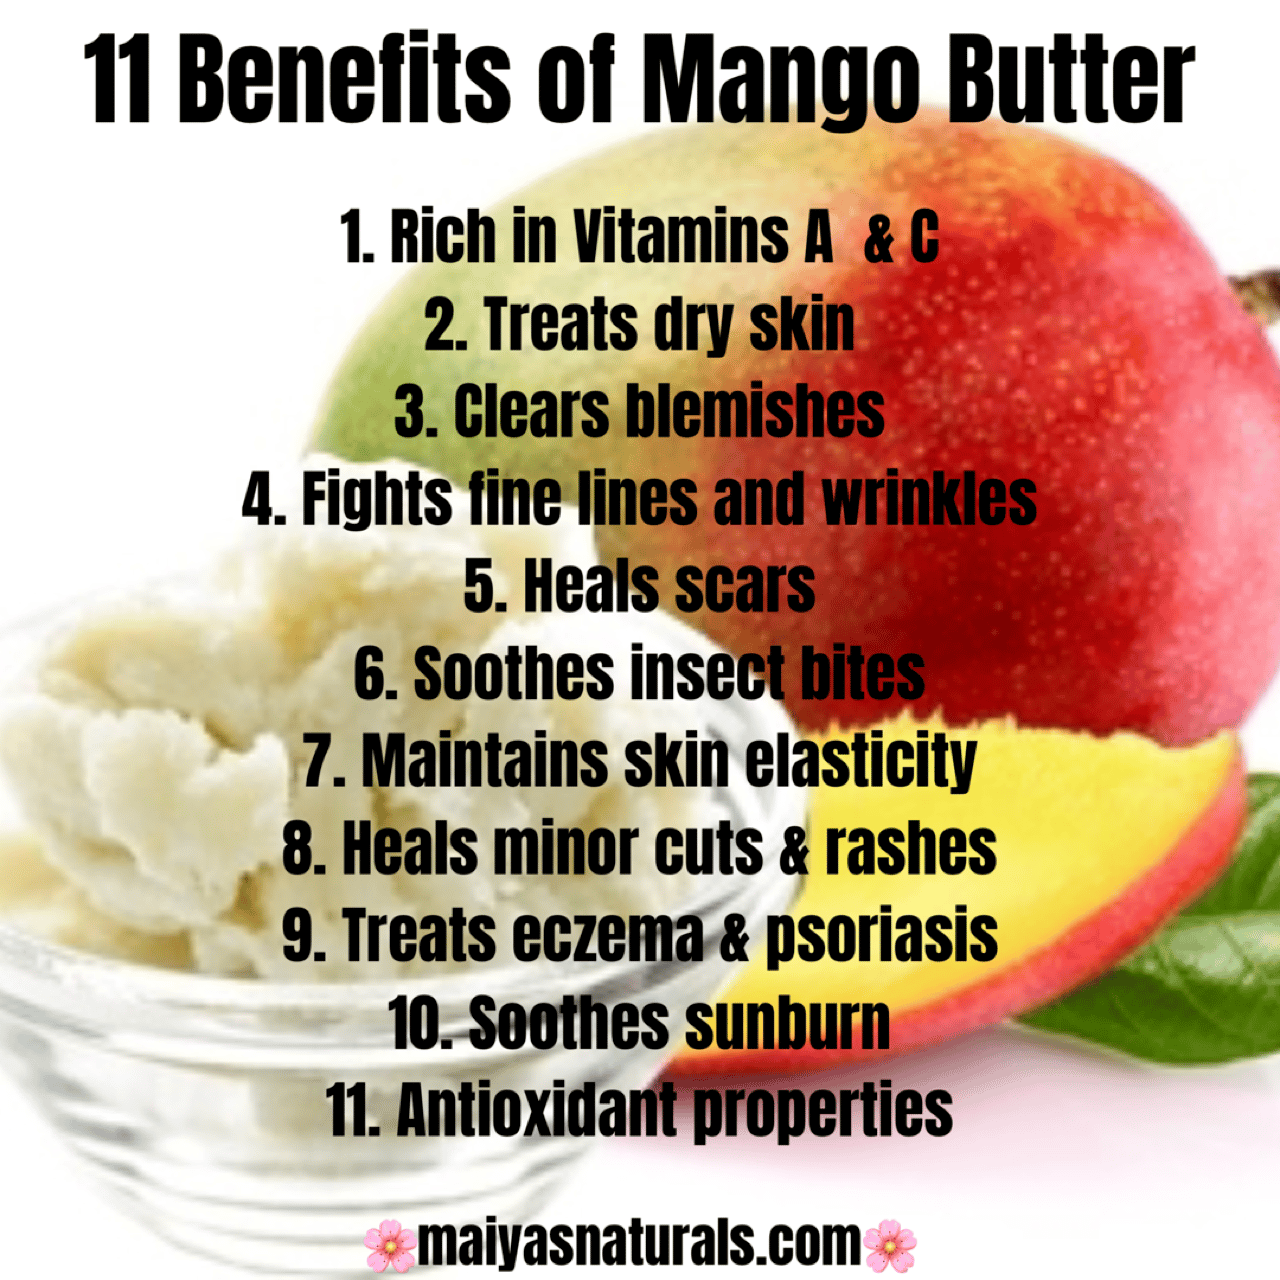 Benefits of Mango Butter for skin.